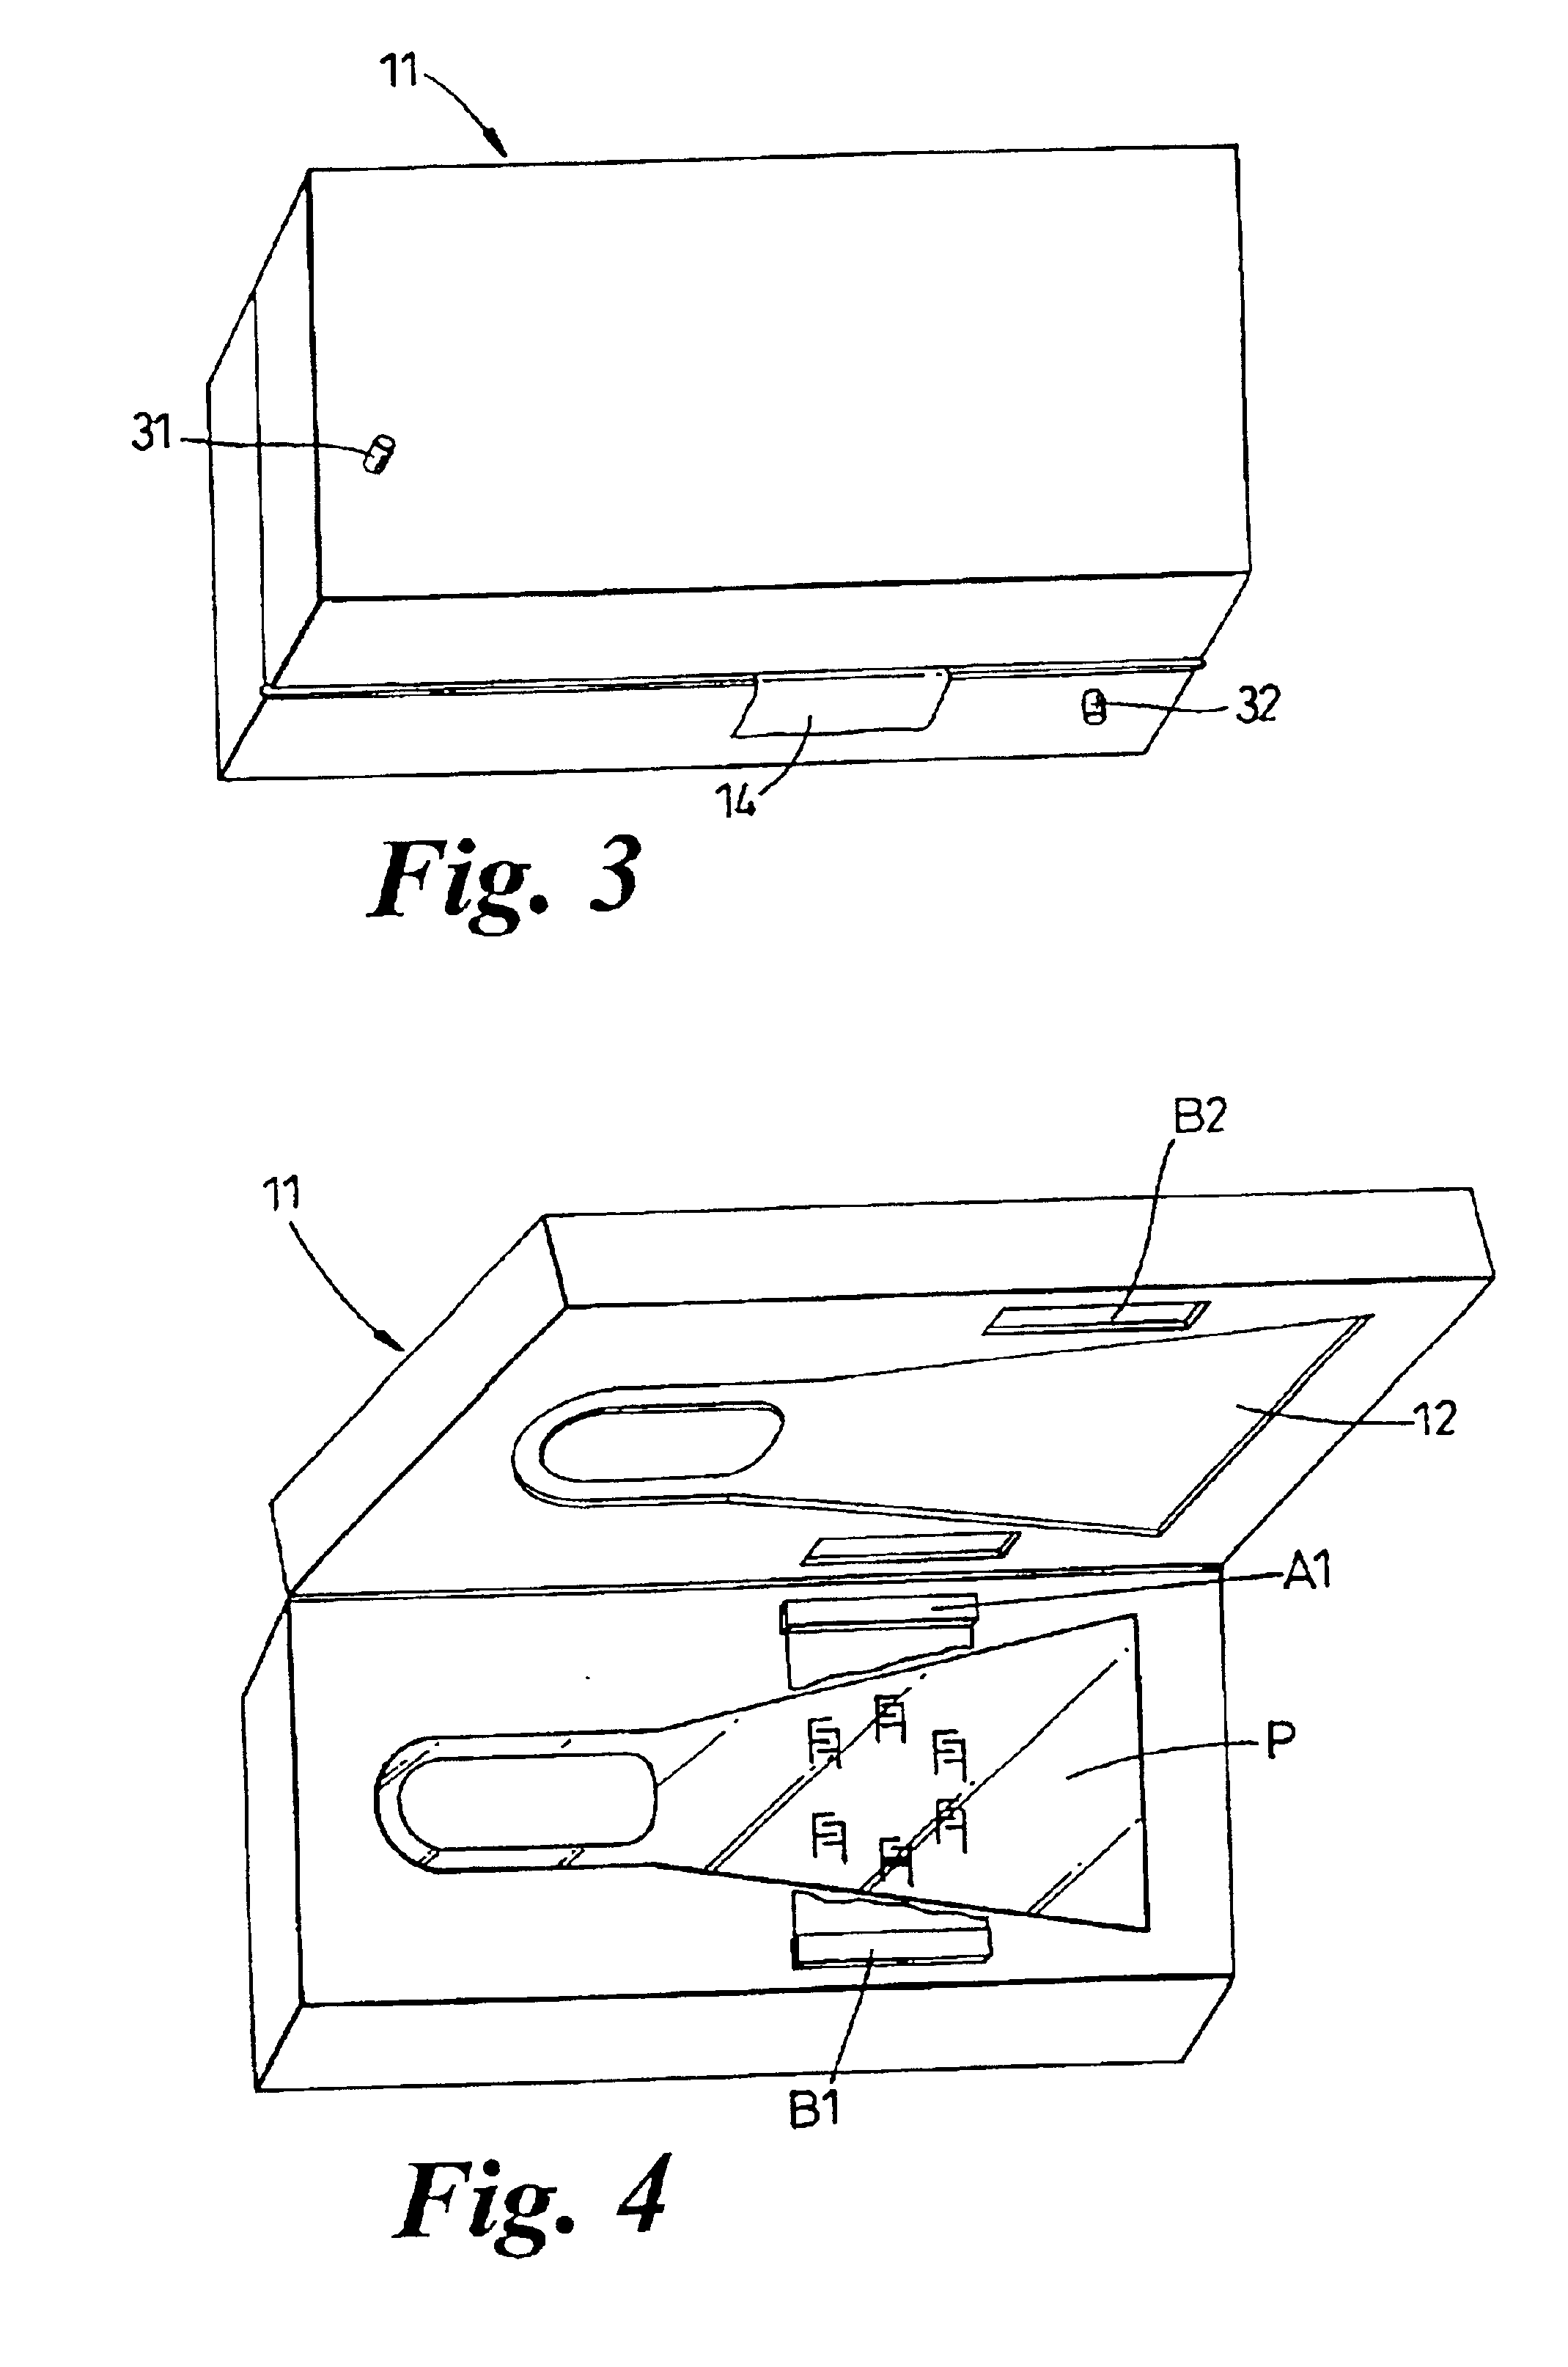 Method of manufacturing a moulded article and a product of the method